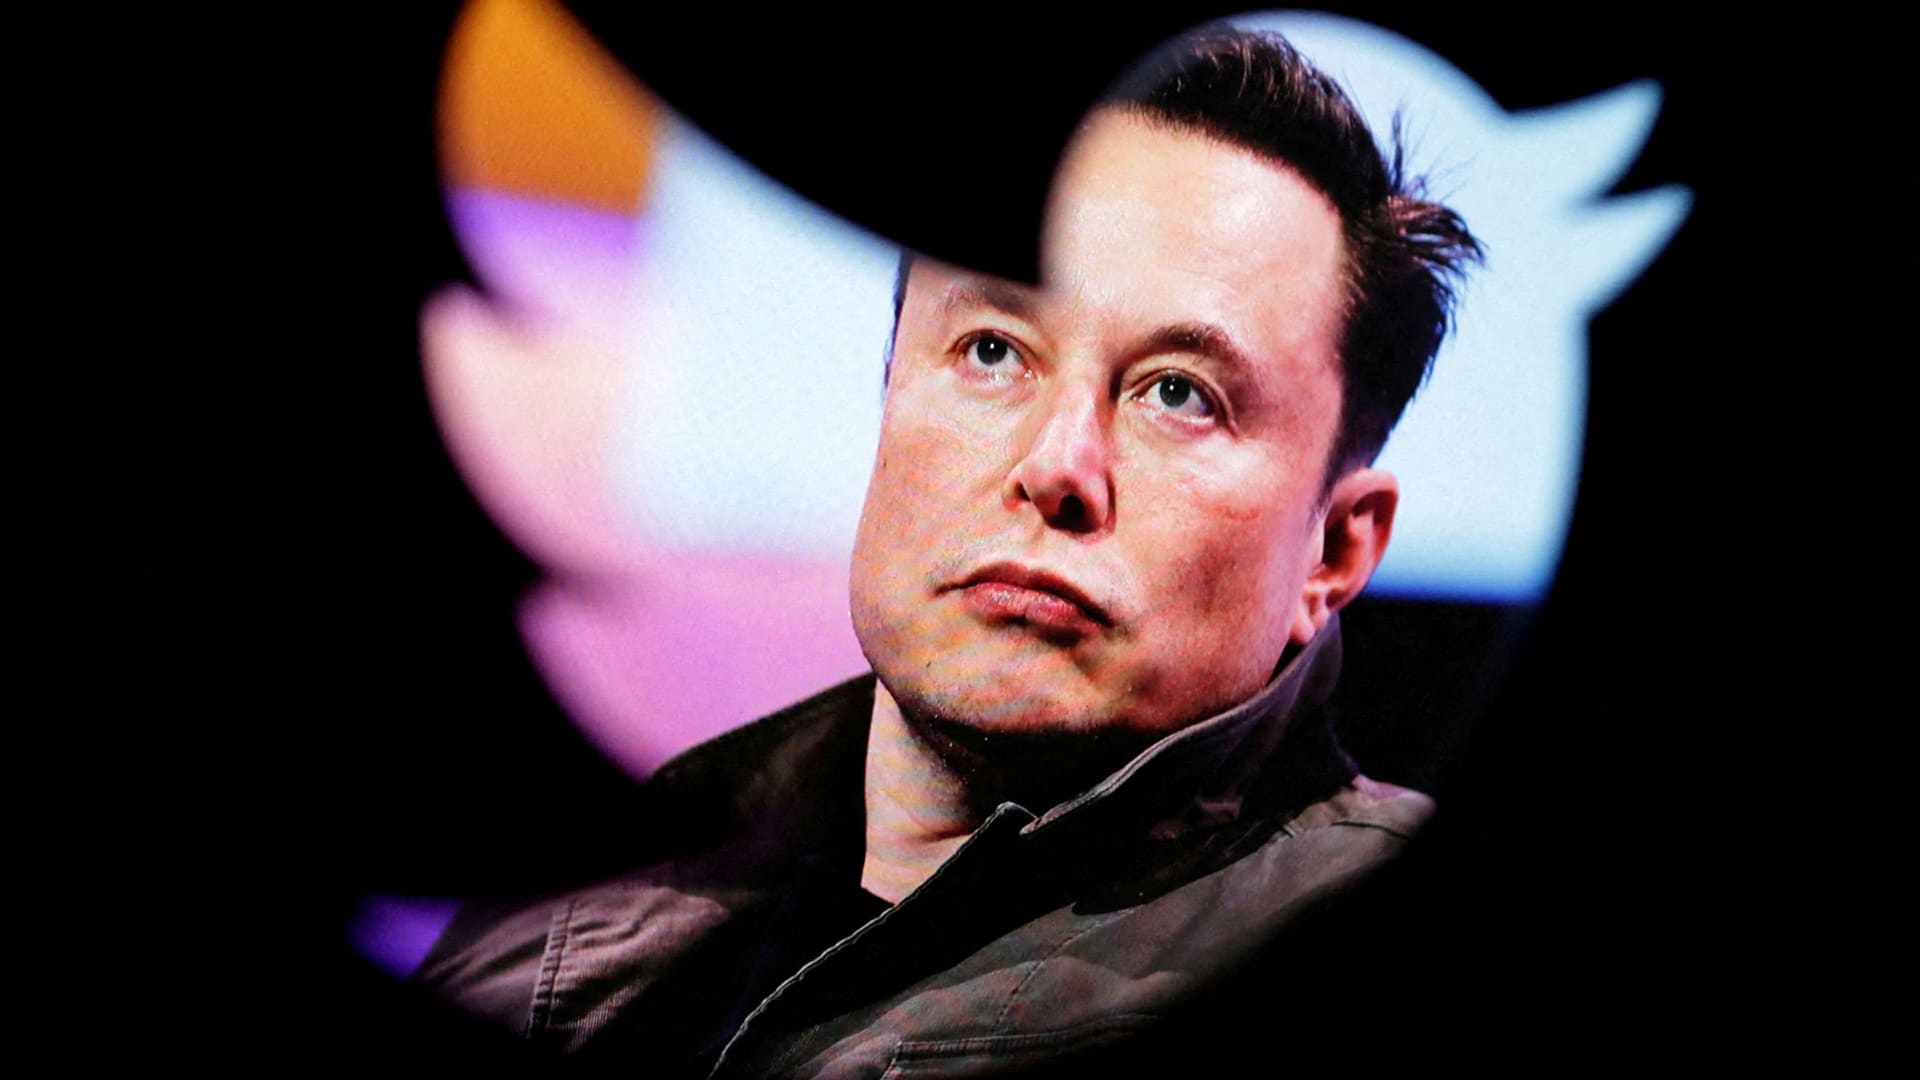 Elon Musk is now working out of Twitter headquarters, thanks